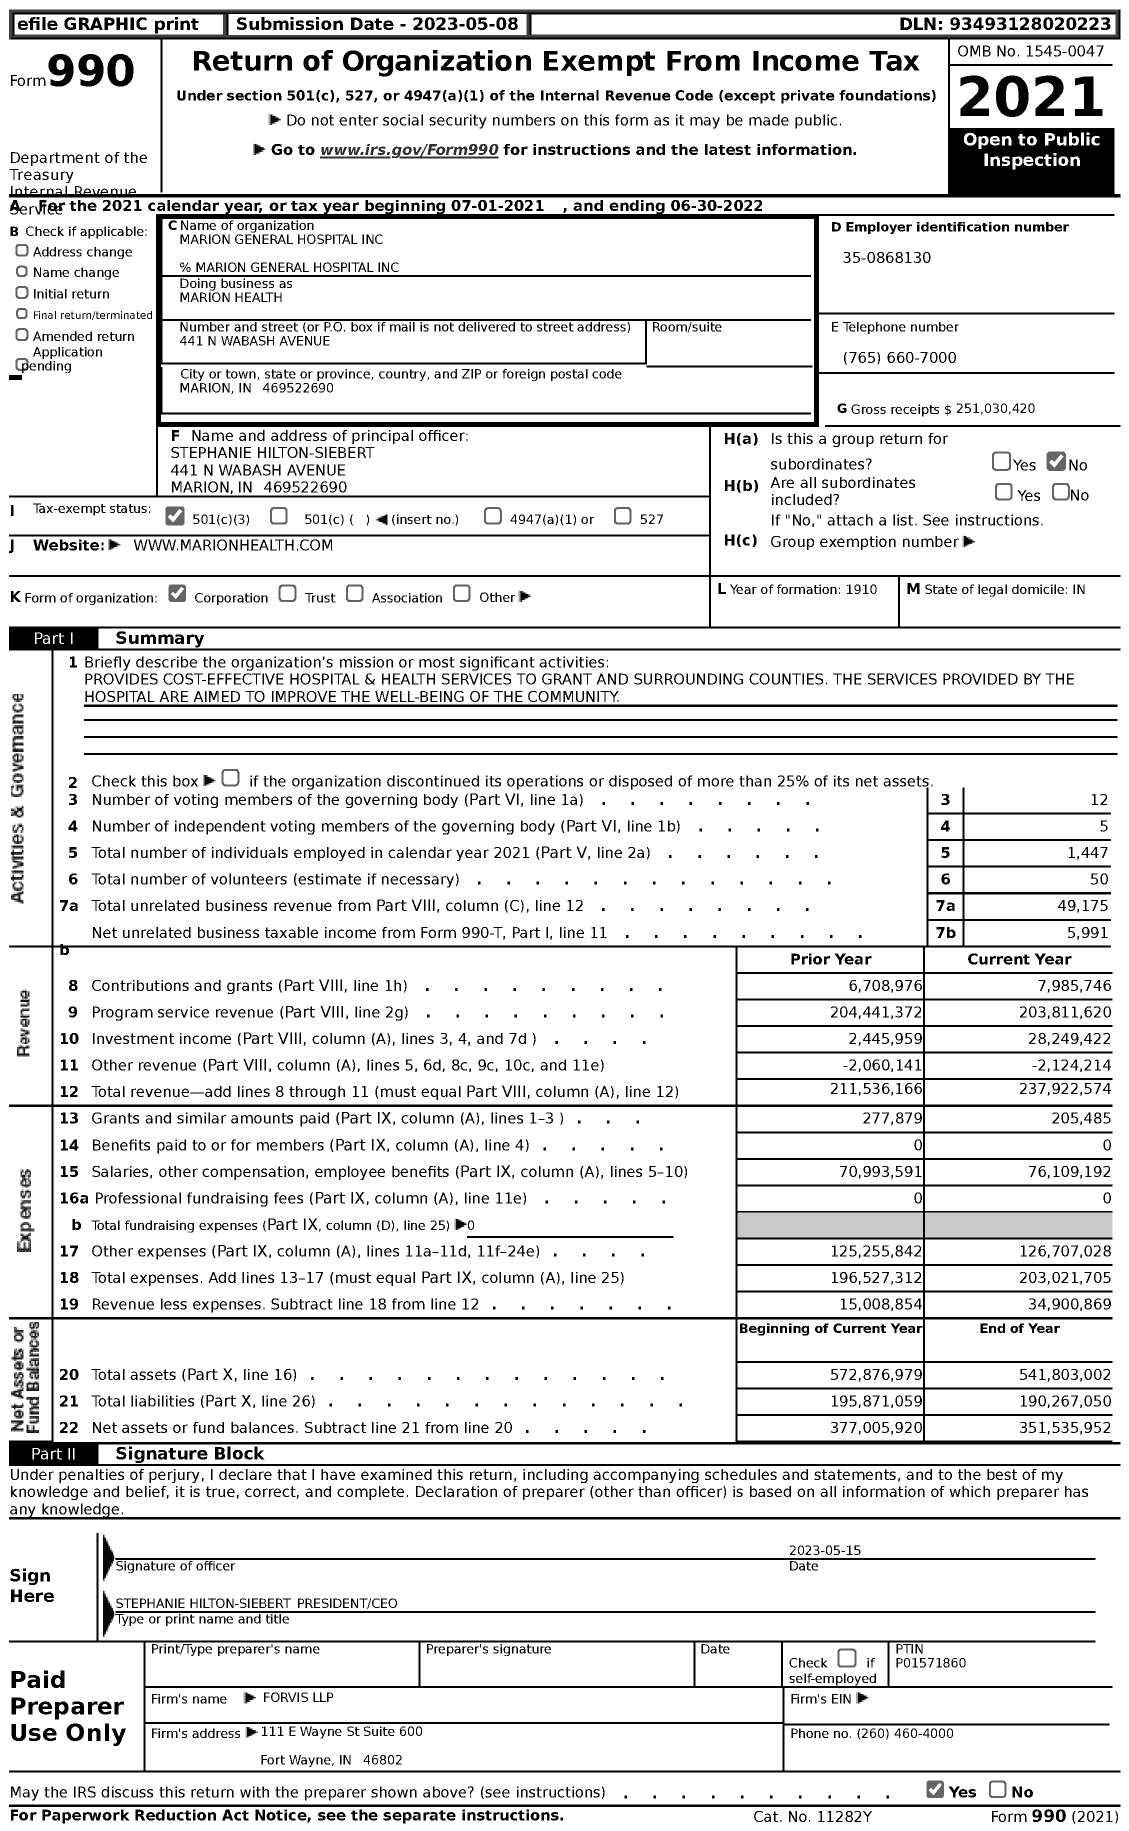 Image of first page of 2021 Form 990 for Marion Health (MGH)